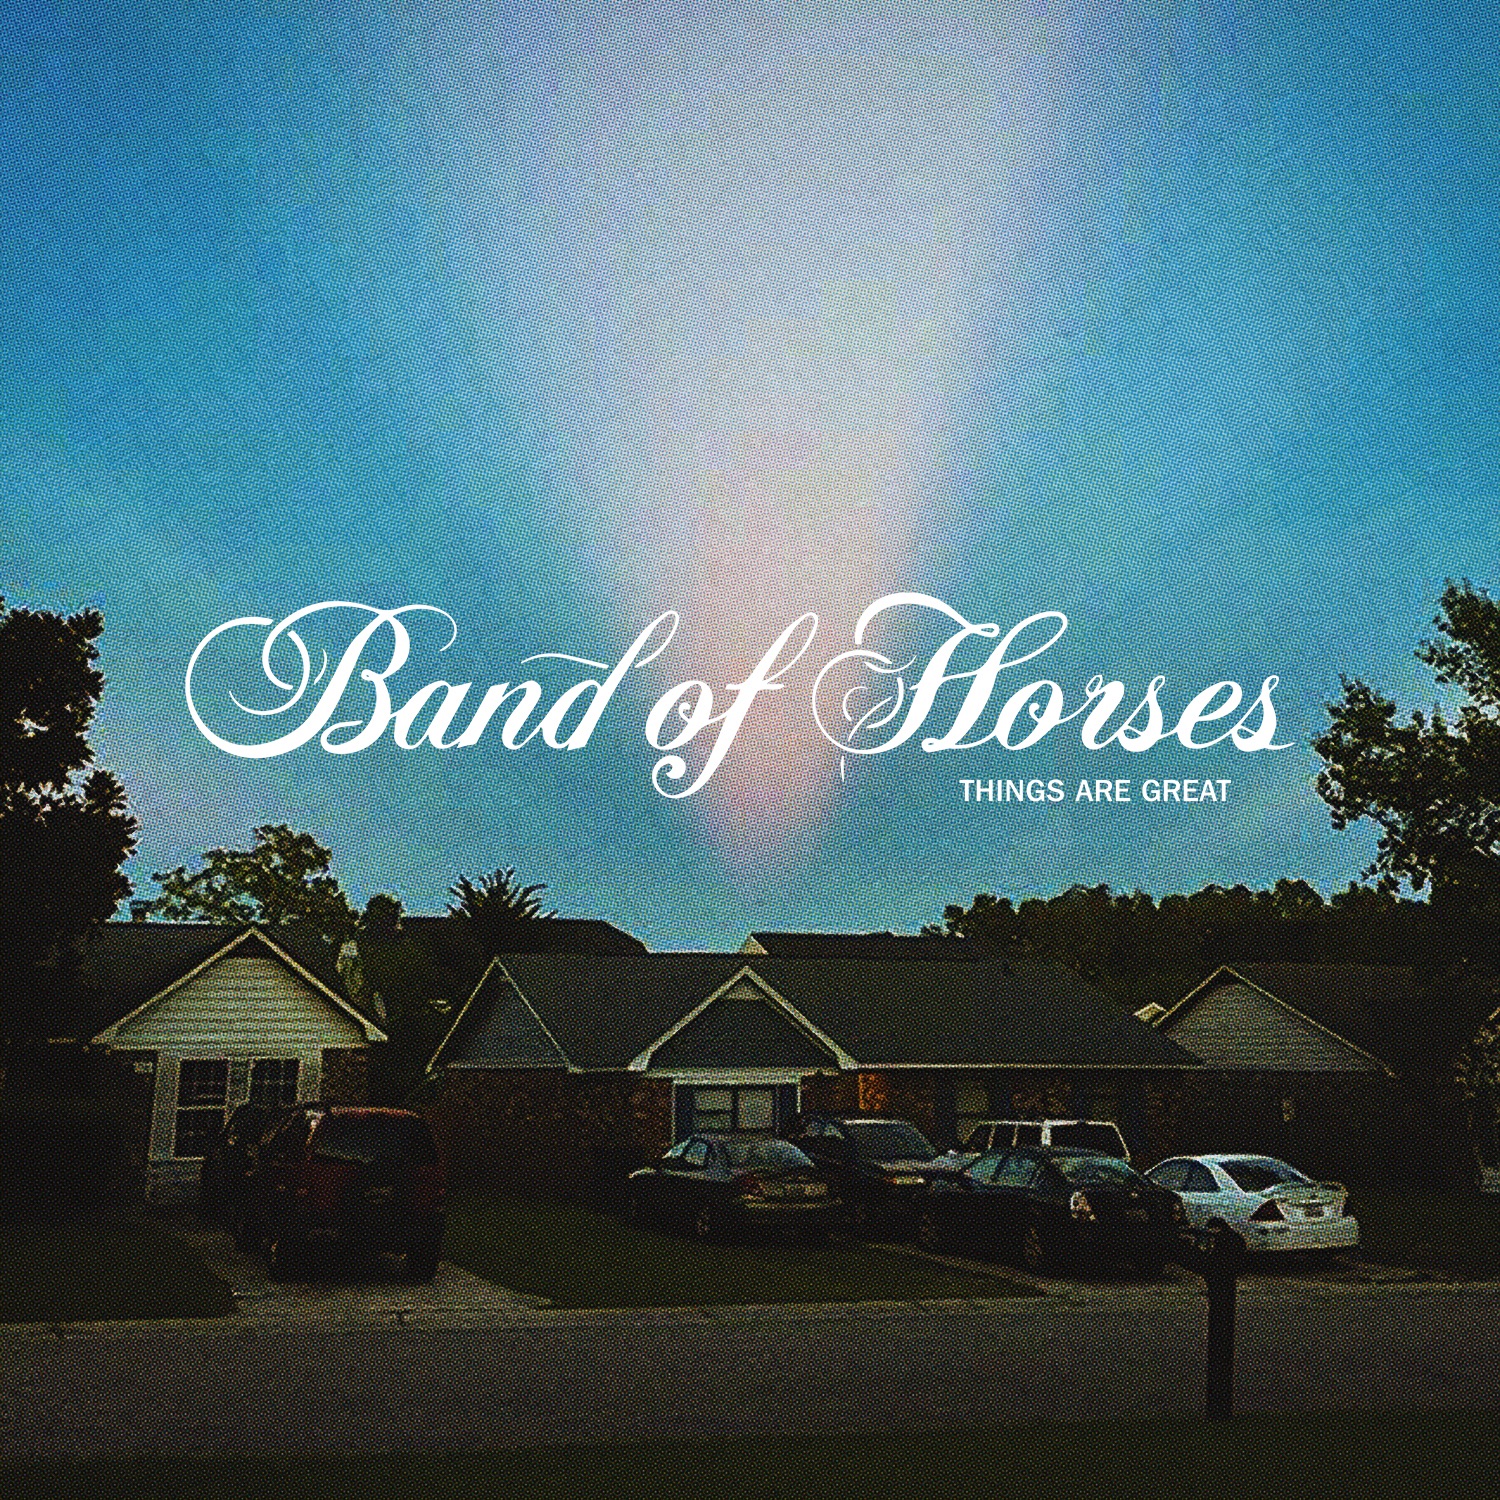 Art for Crutch by Band of Horses